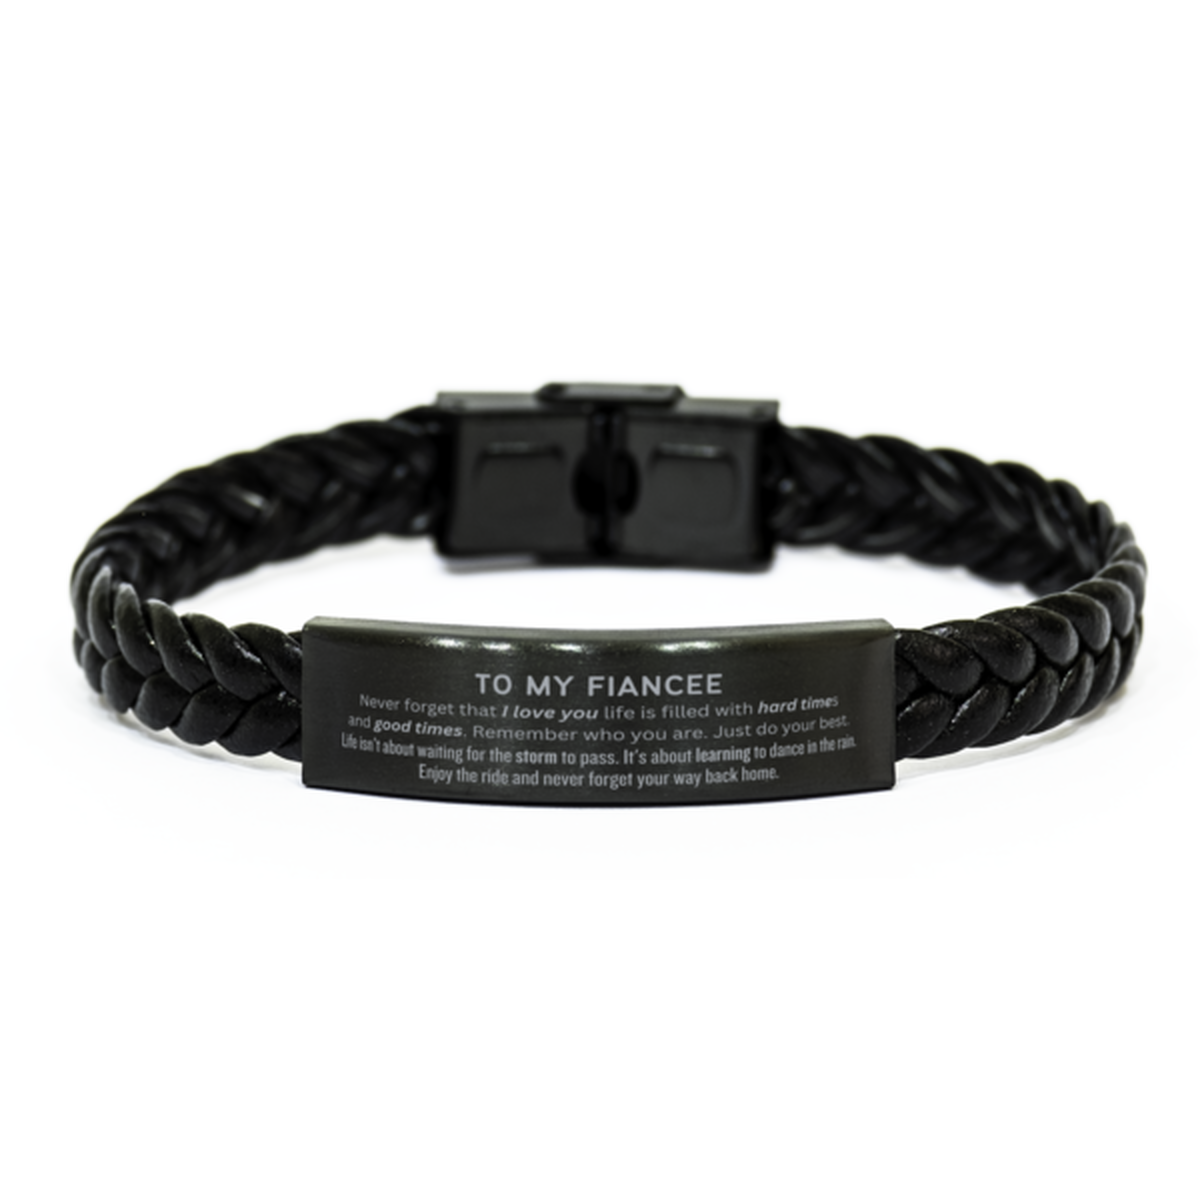 Christmas Fiancee Braided Leather Bracelet Gifts, To My Fiancee Birthday Thank You Gifts For Fiancee, Graduation Unique Gifts For Fiancee To My Fiancee Never forget that I love you life is filled with hard times and good times. Remember who you are. Just